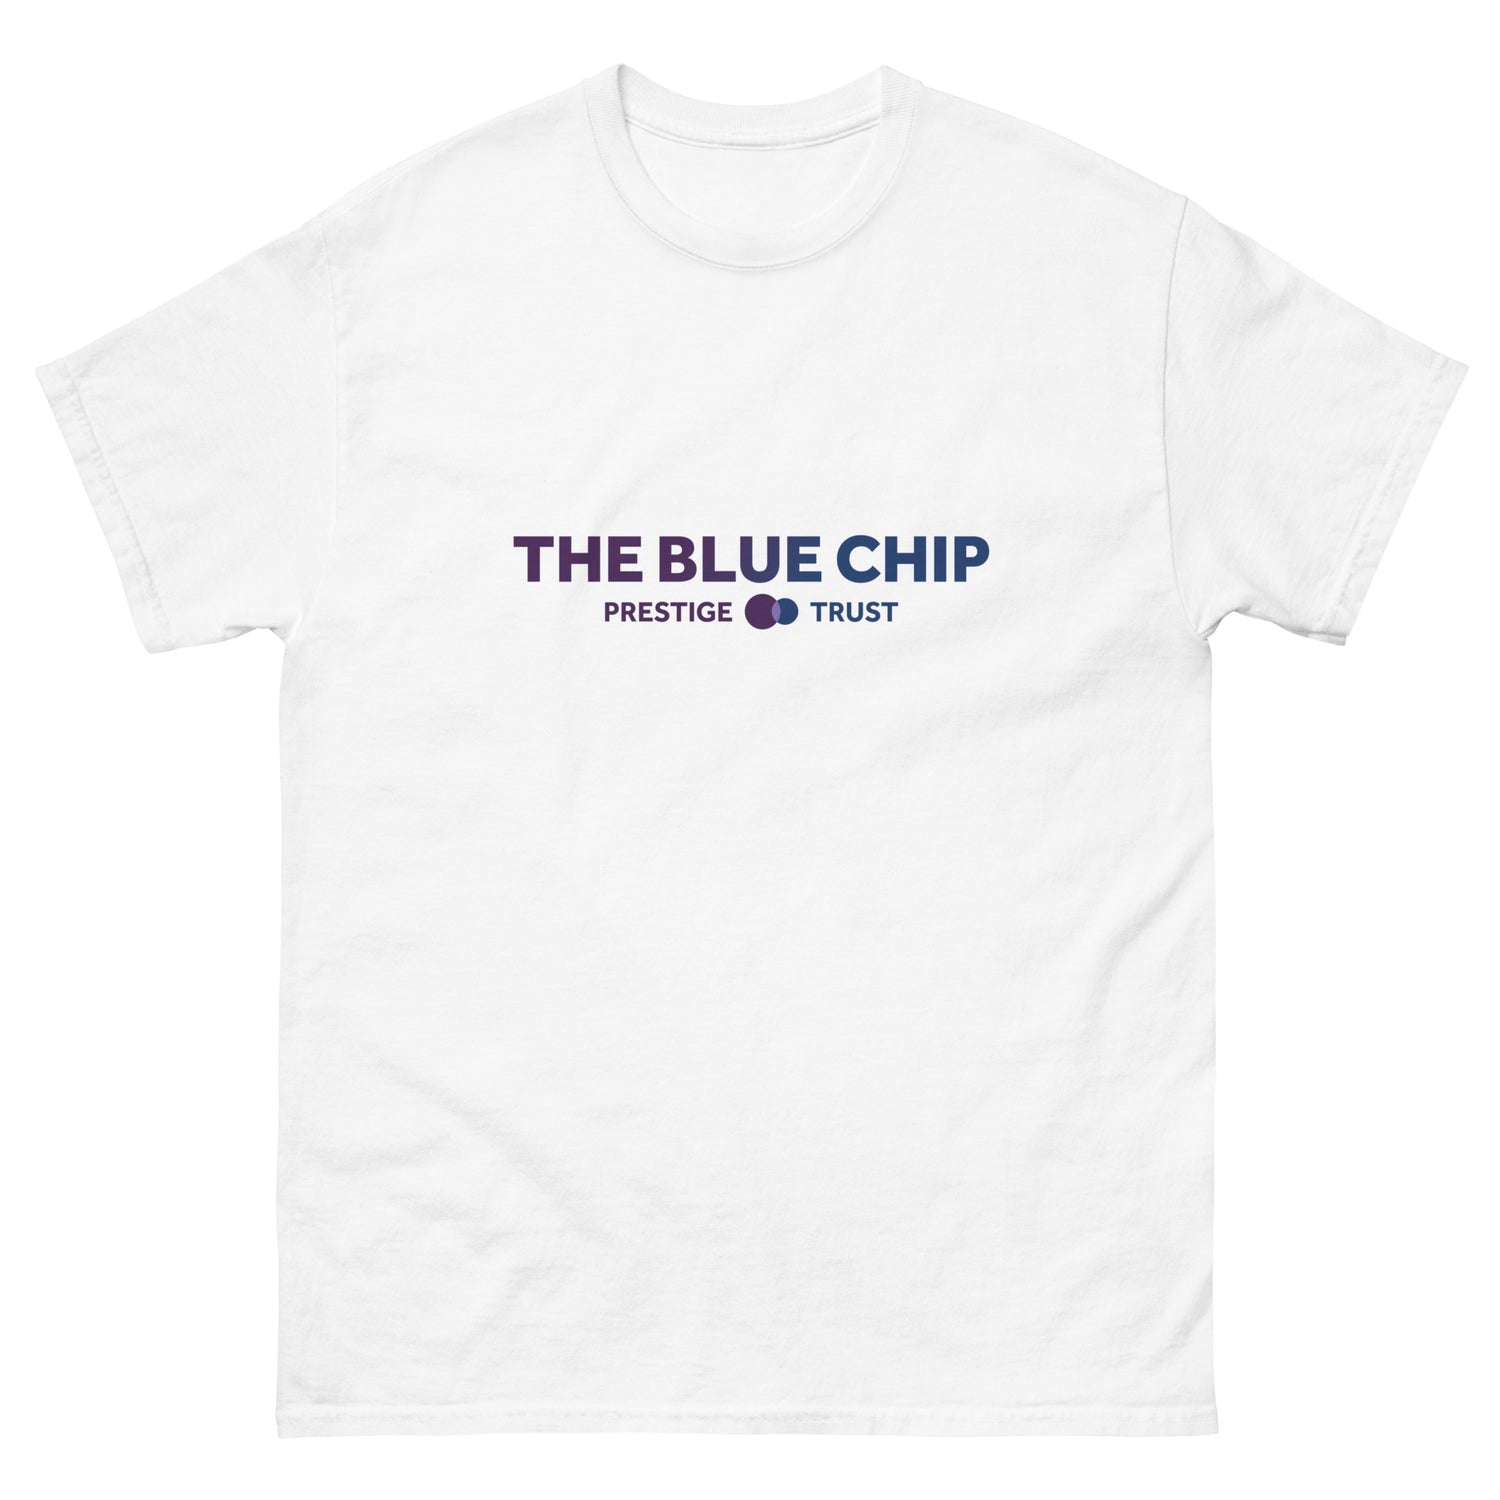 The Blue Chip